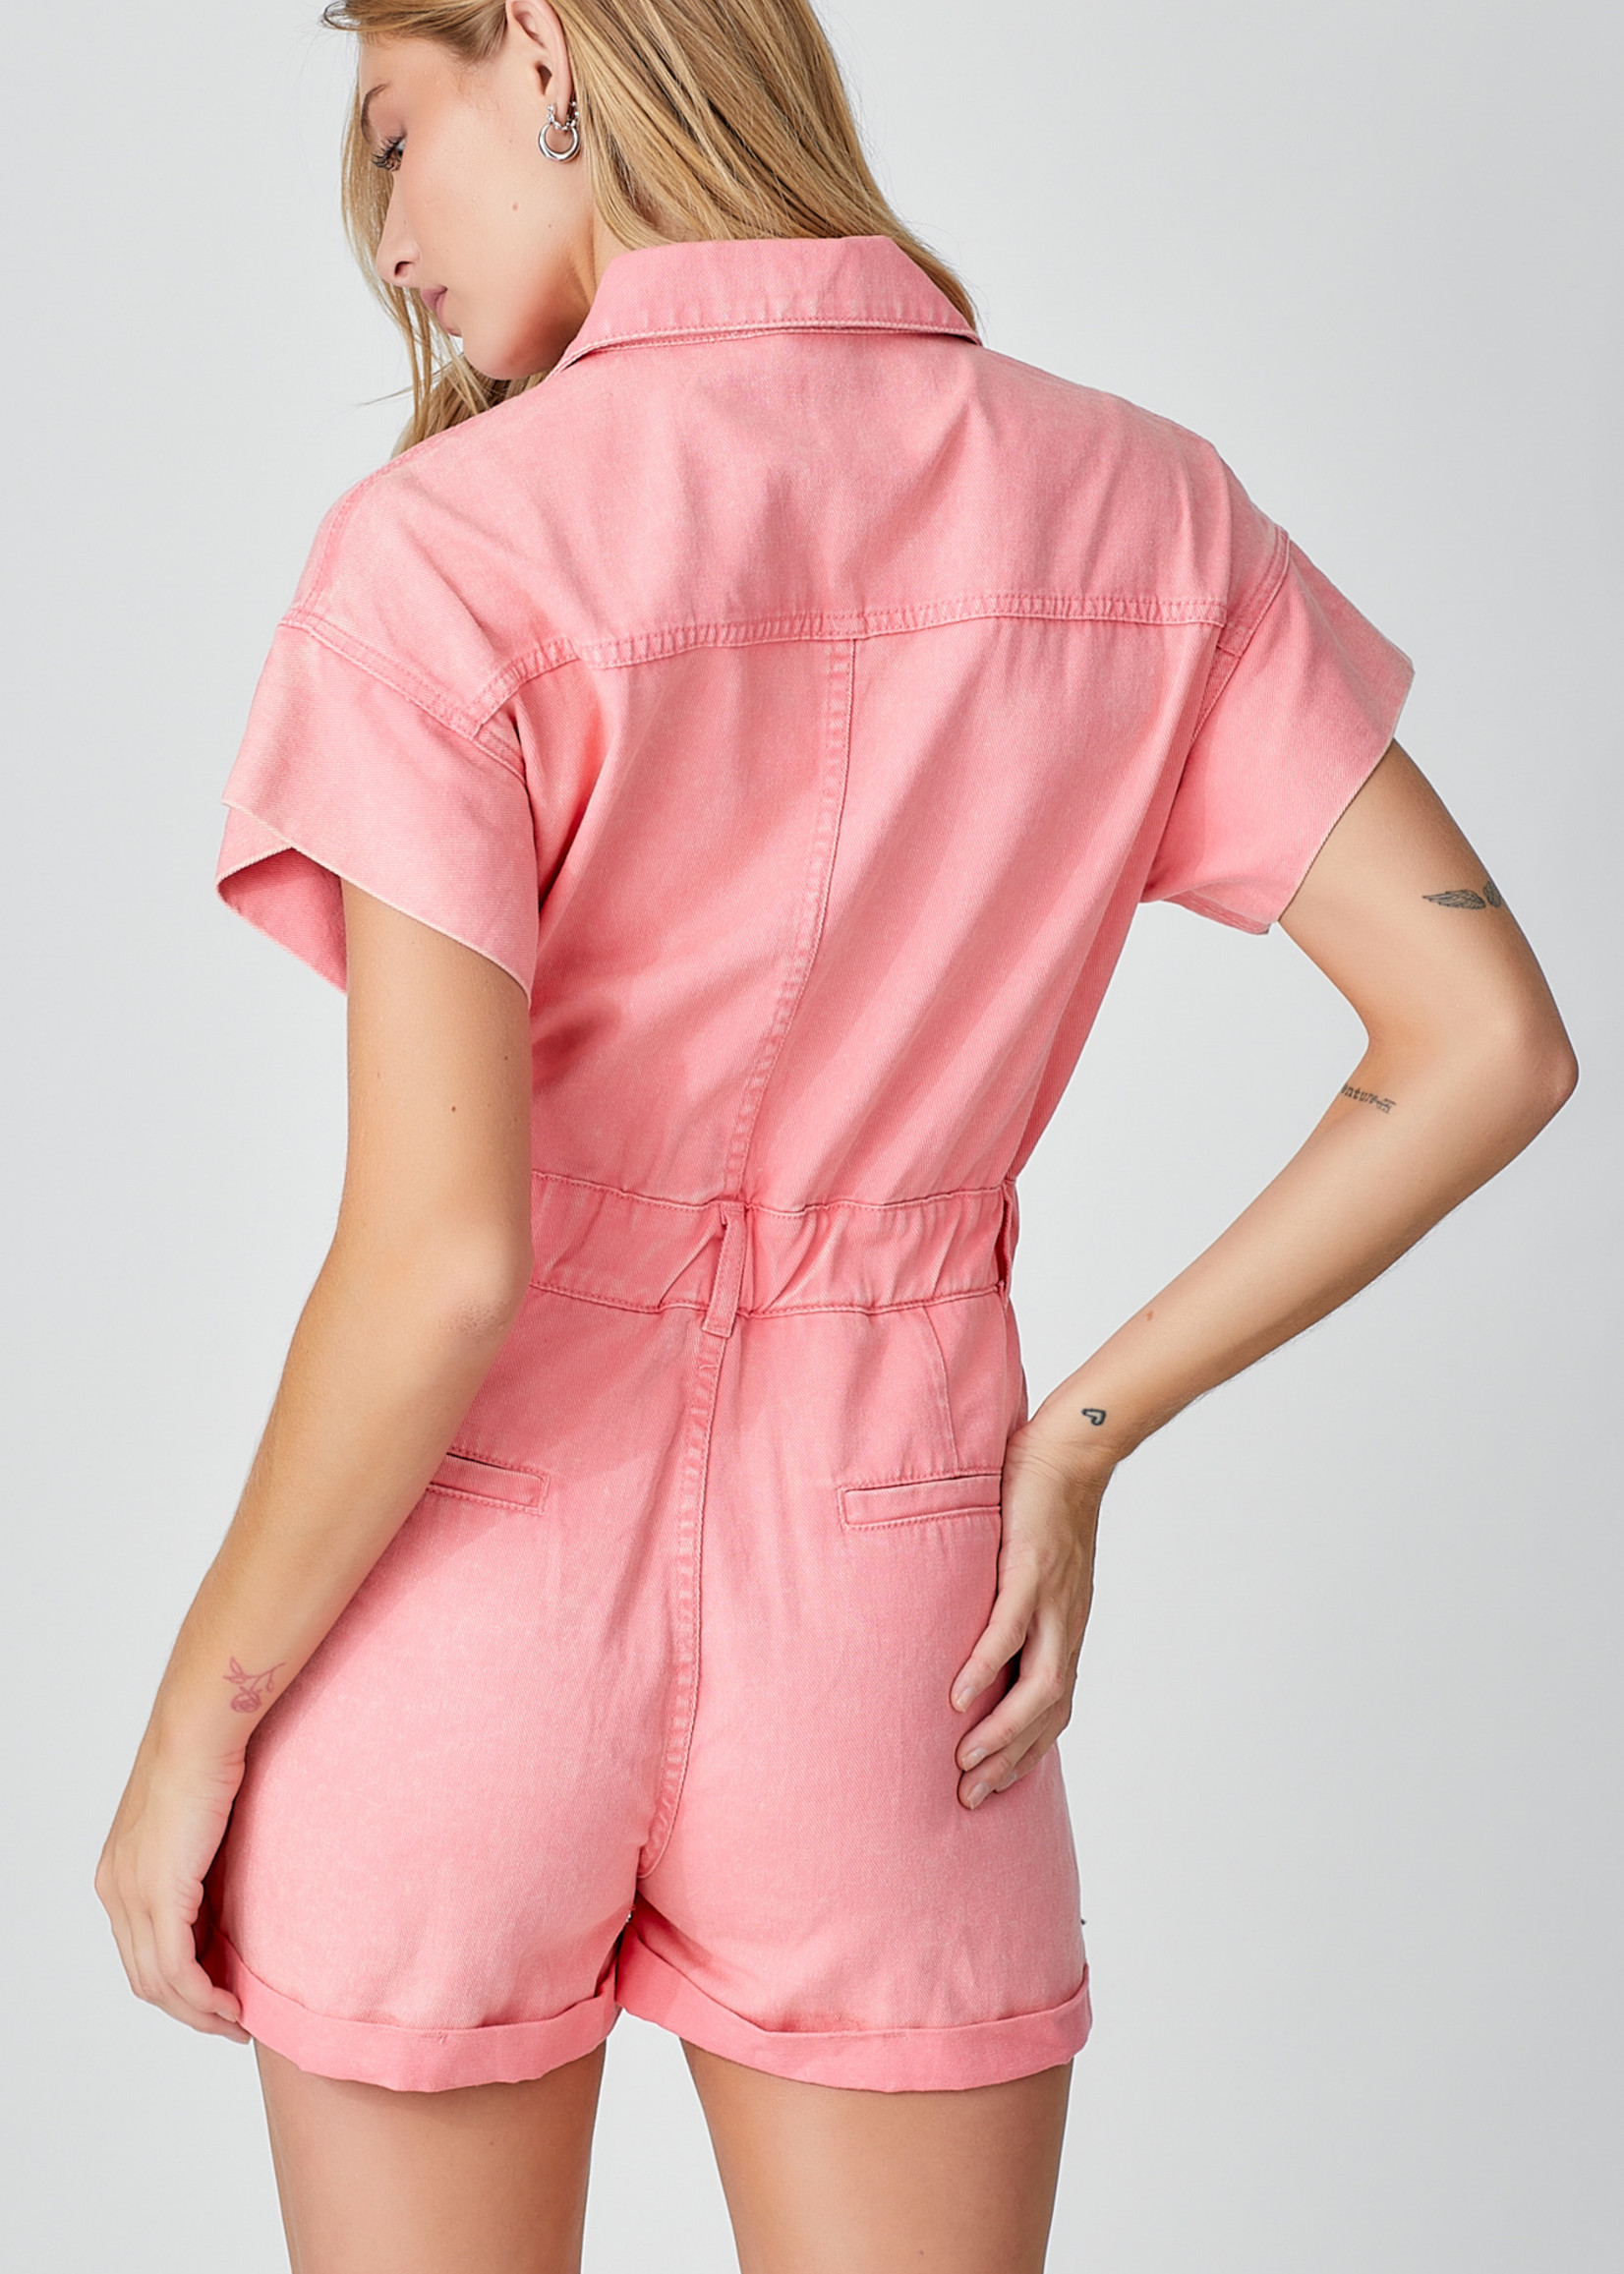 Anabelle Pink Romper